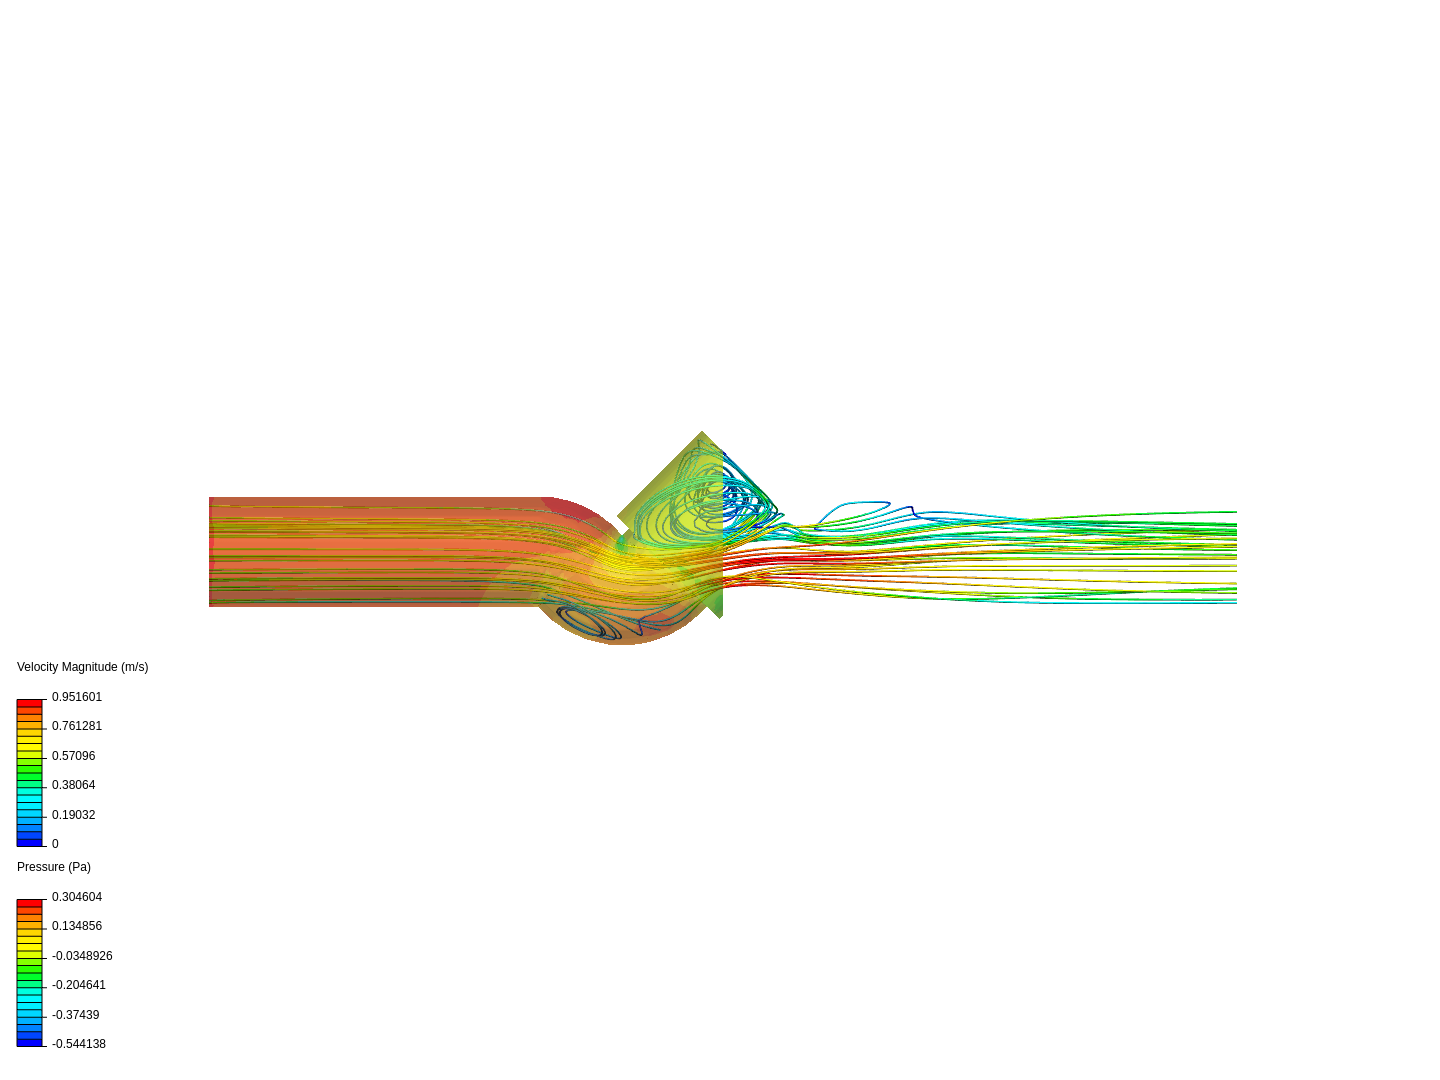 CFD Smulation of Turbulent Flow in a Regulator Valve  image